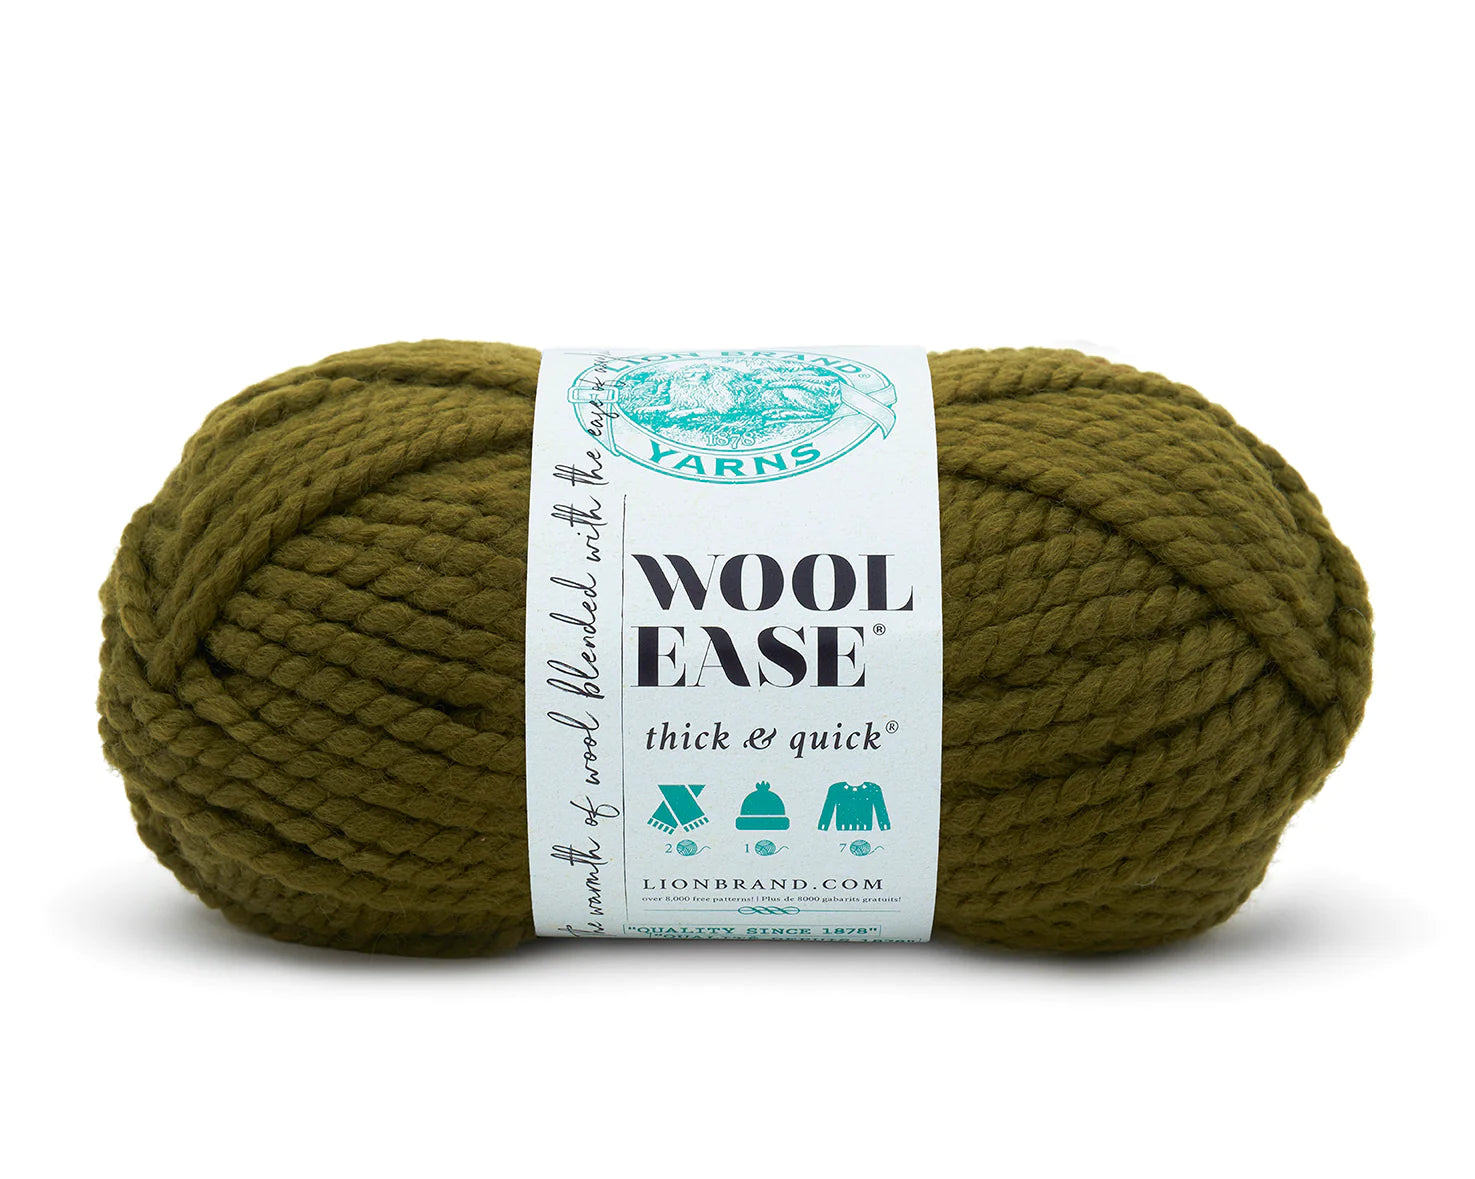 Lion Brand Wool-Ease Thick & Quick Yarn-Starlight - Metallic, 1 count - Jay  C Food Stores